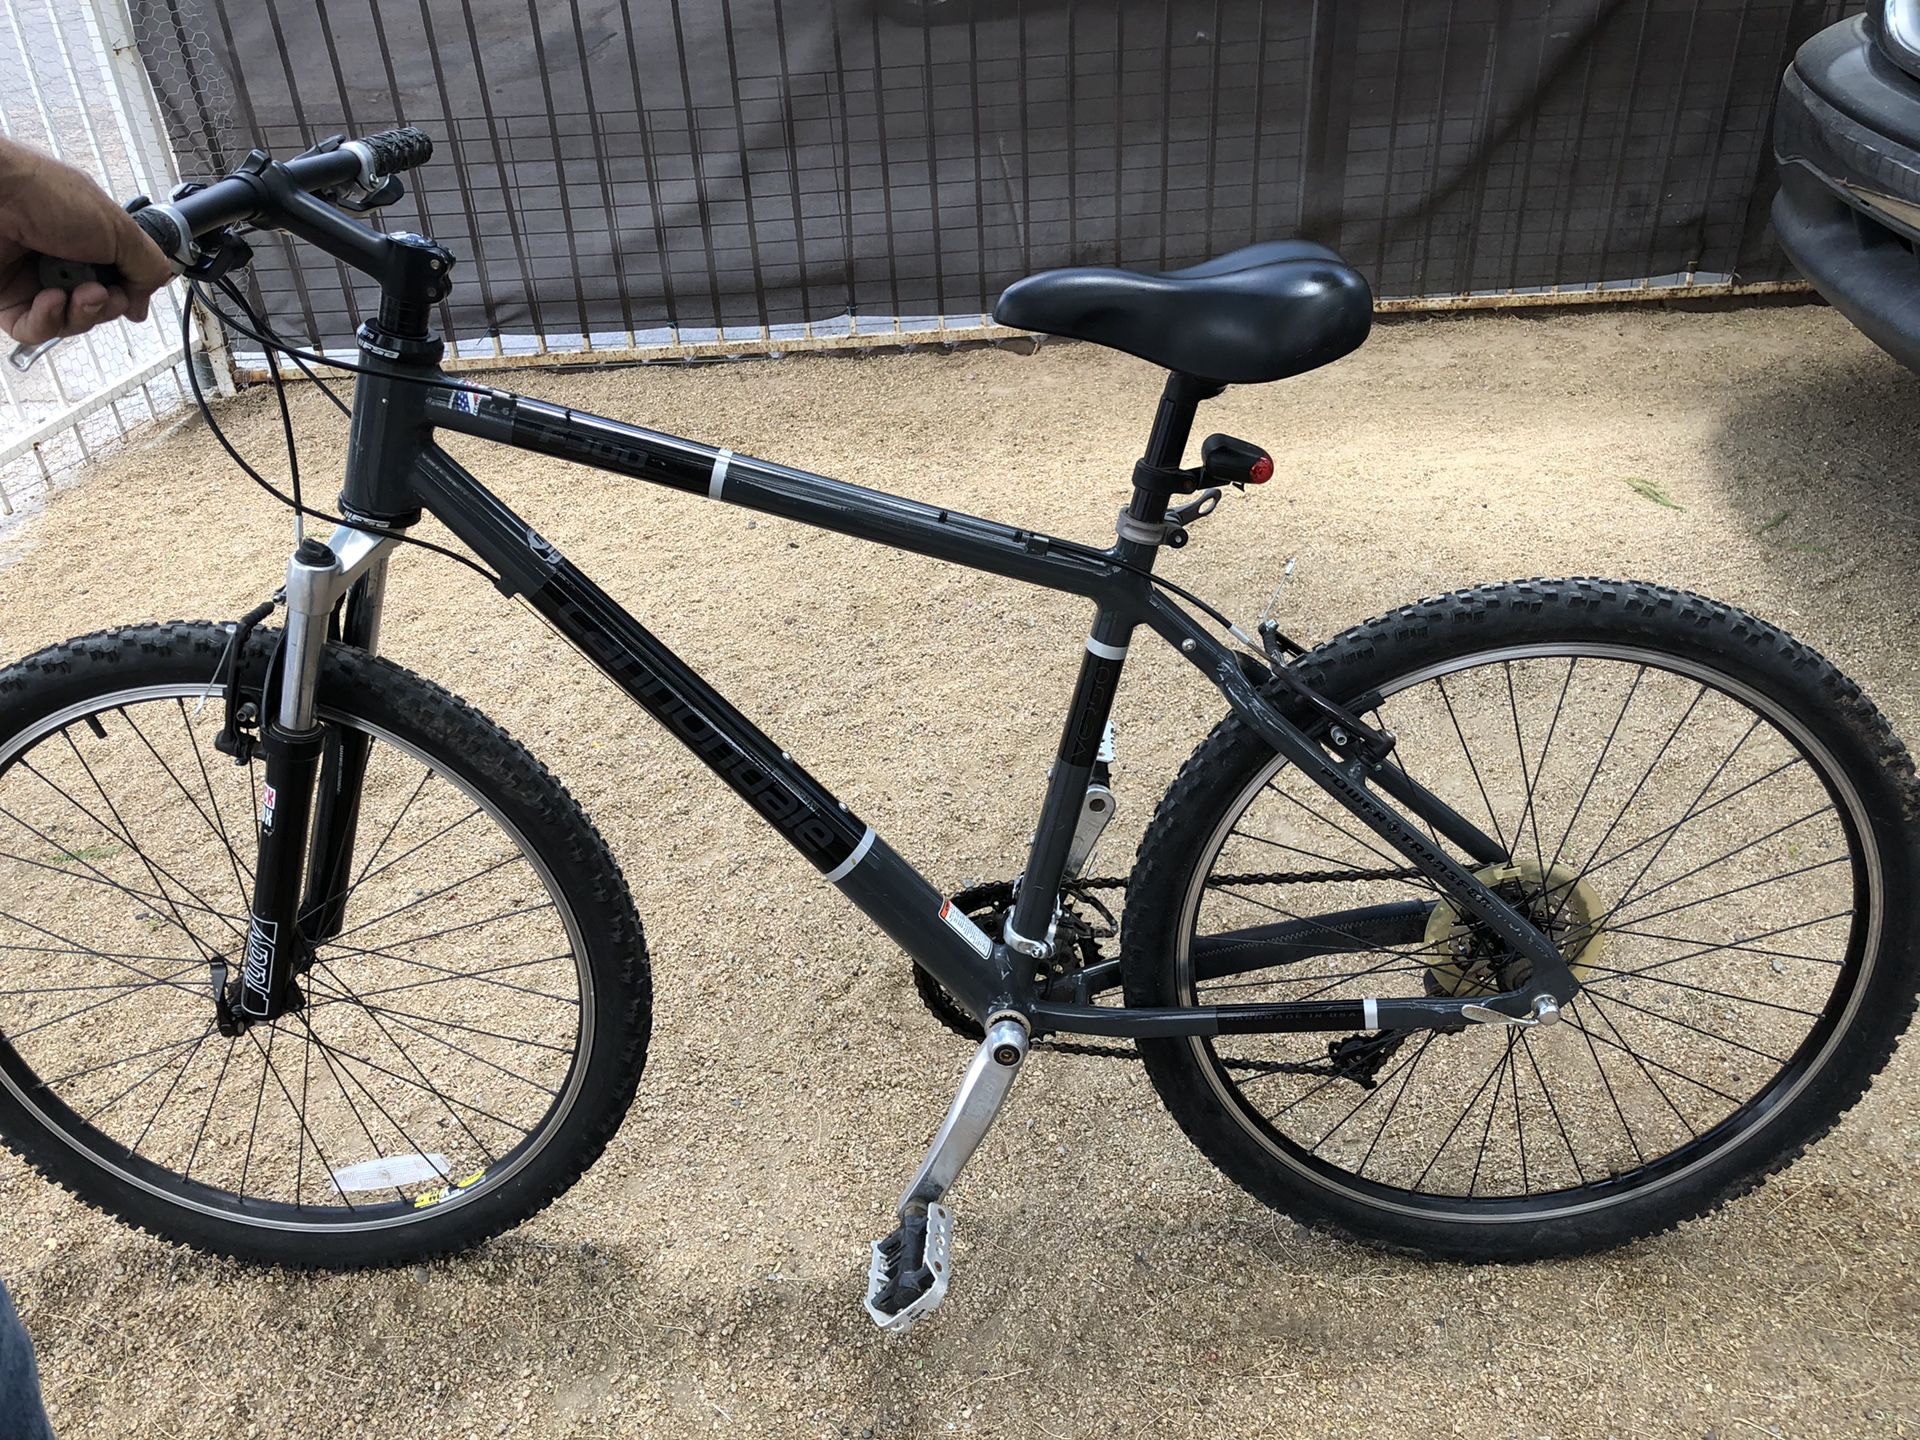 Cannondale mountain/other bike $125